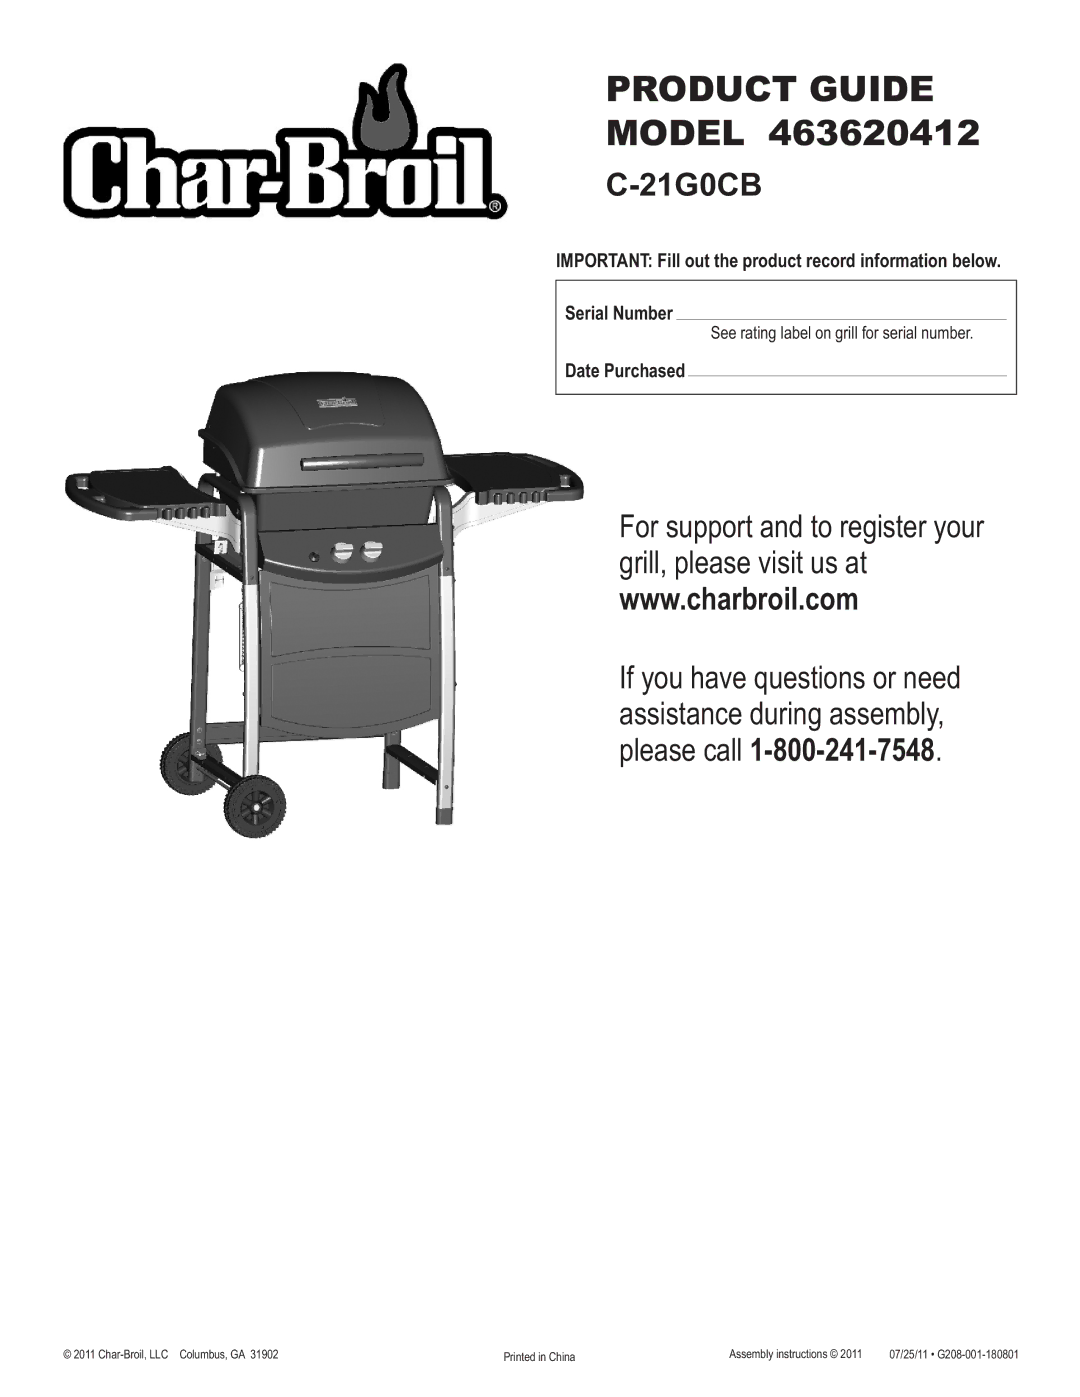 Char-Broil 463620412 manual Product Guide, Date Purchased 